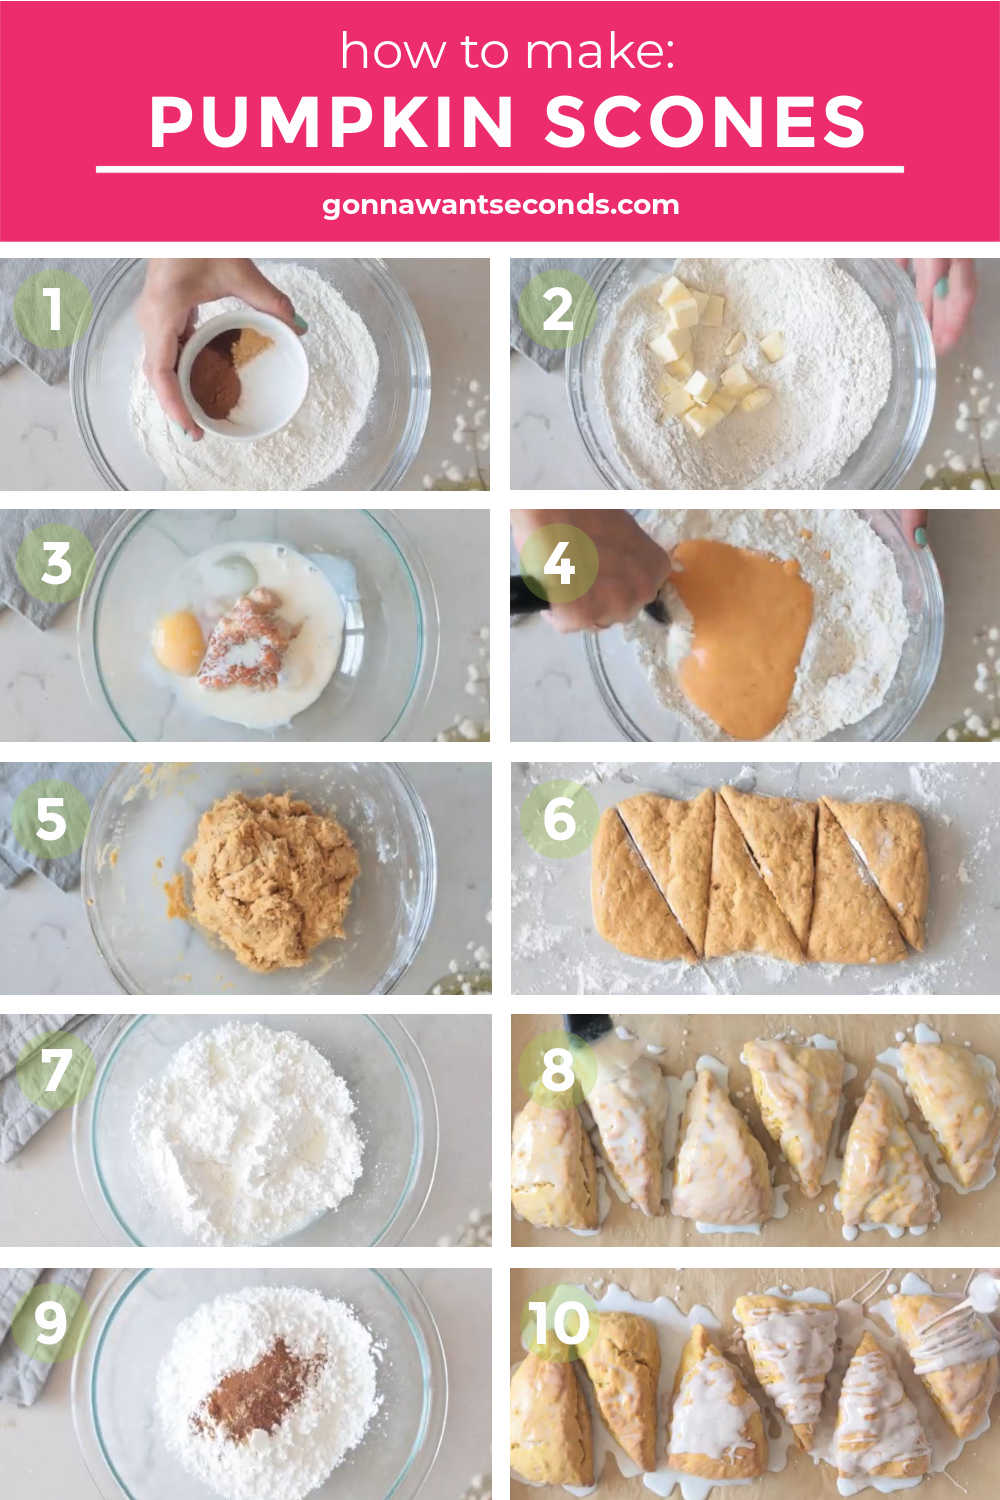 Step by step how to make pumpkin scones